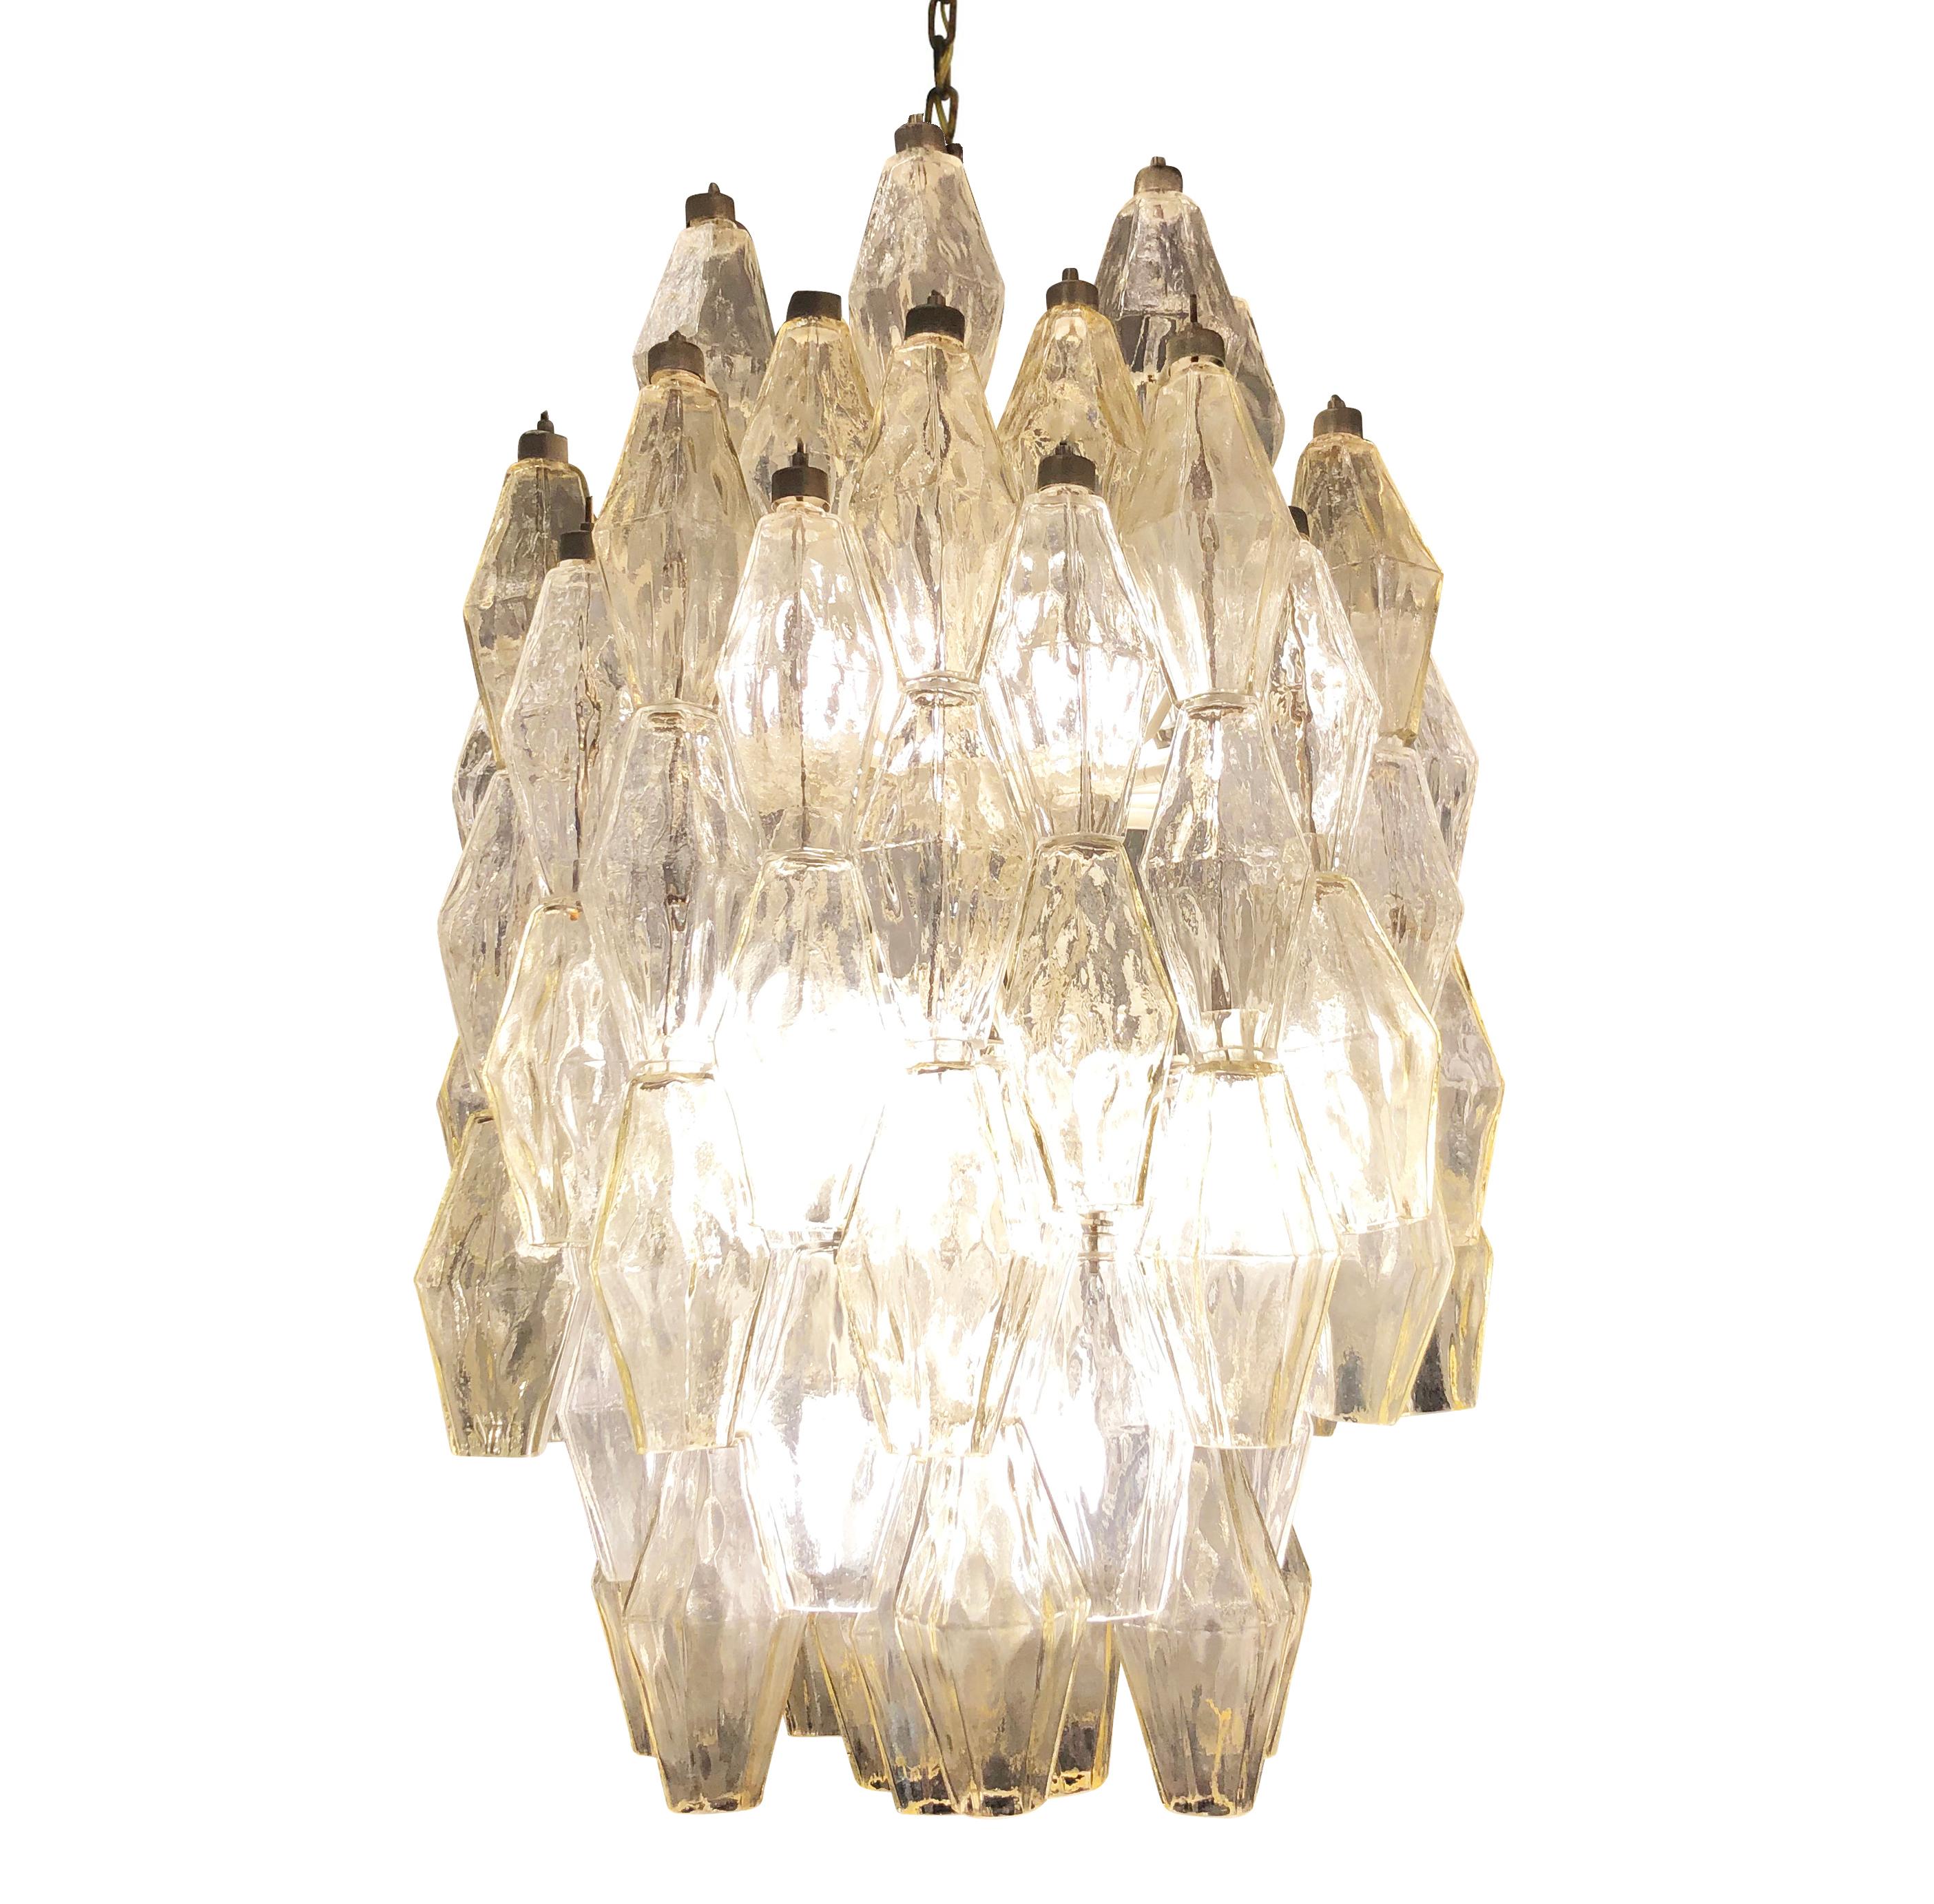 Midcentury chandelier by Venini made with their iconic poliedri Murano glasses. The glasses are a mix of clear ones and light amber ones mounted on a white lacquered frame. Ready to hang on a chain.

Condition: Excellent vintage condition, minor